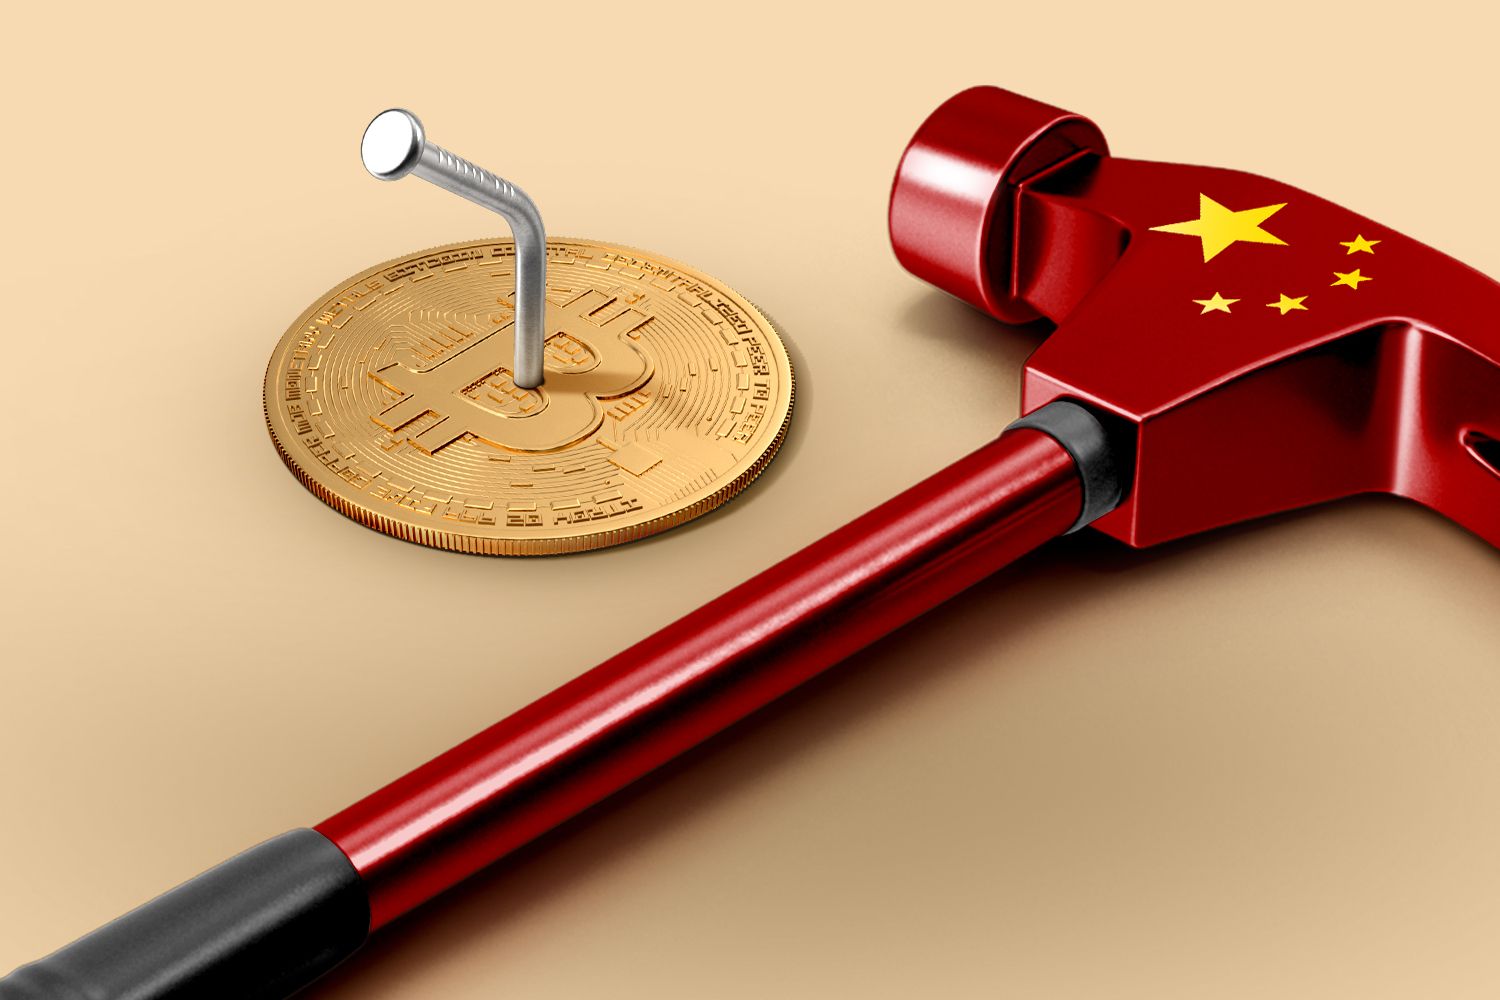 A red hammer with the Chinese flag's stars on it next to a bitcoin with a bent nail in it.